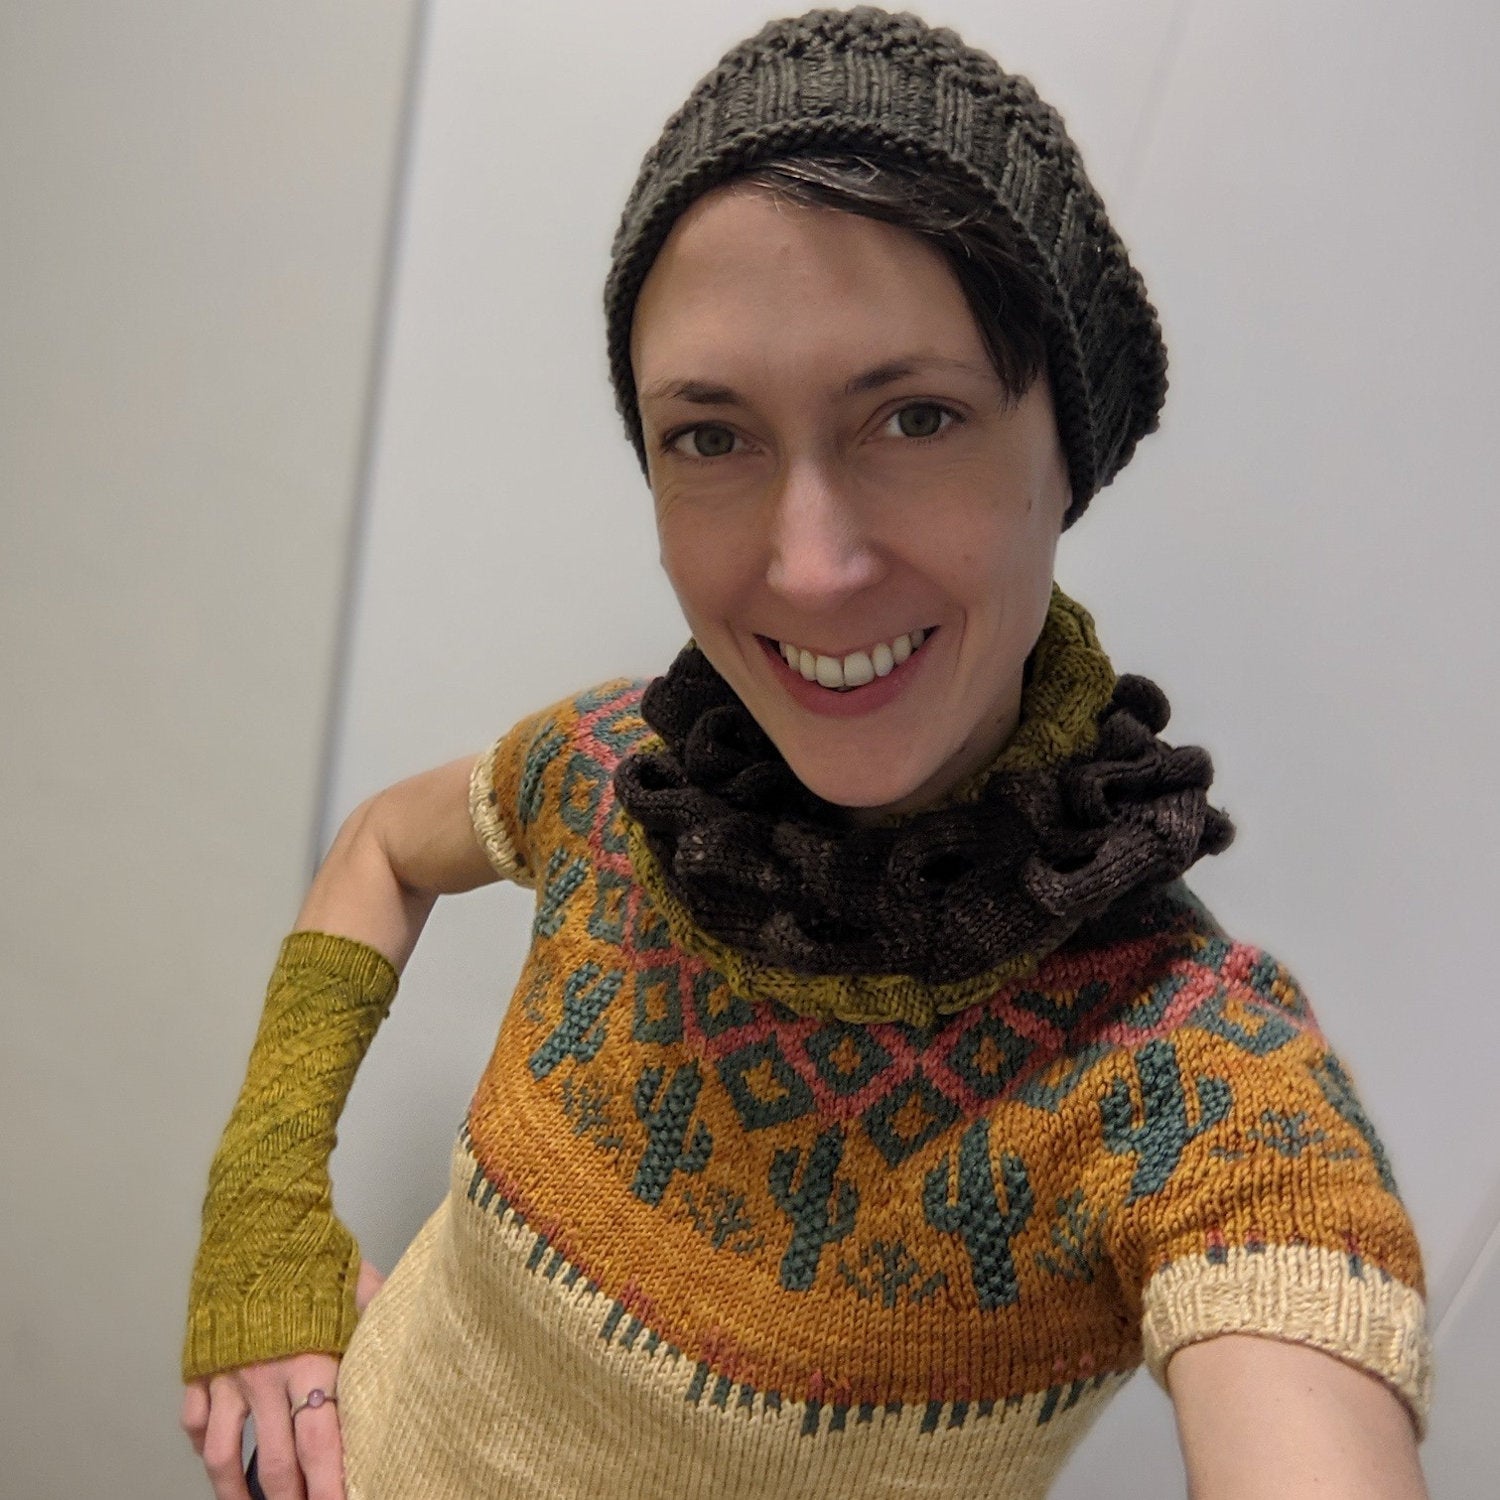 Woman wearing hand knitted hat, cowl, sweater and wristwarmers